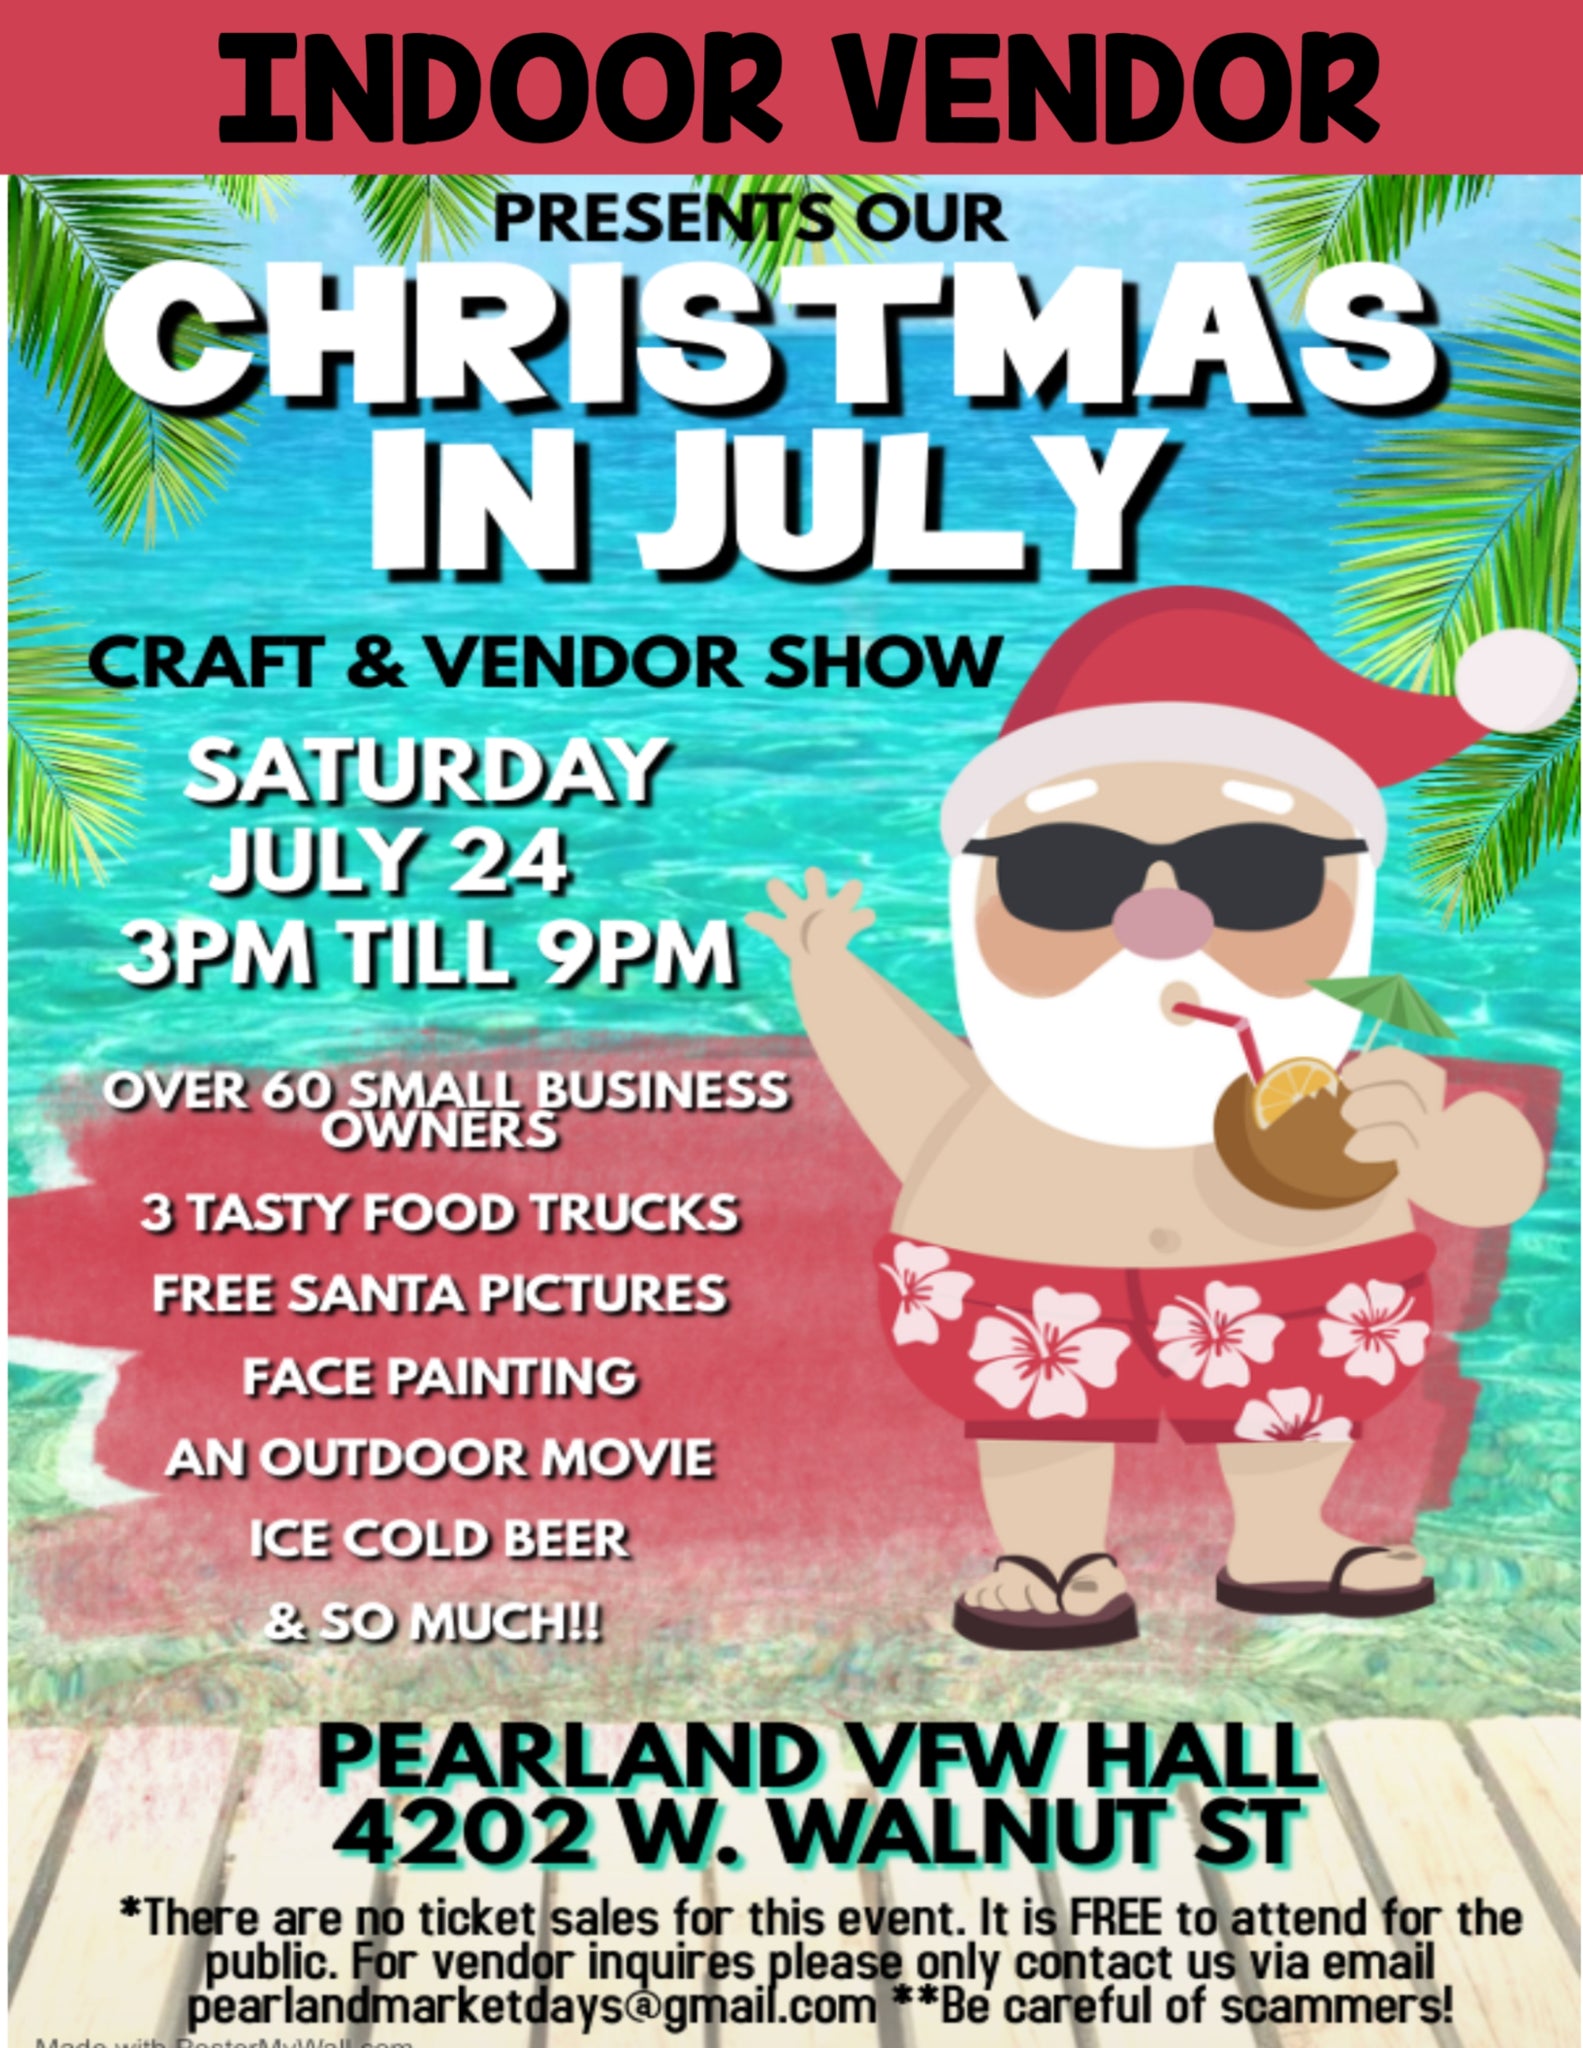 Pearland SATURDAY July 24th, 2021 - INDOOR BOOTH